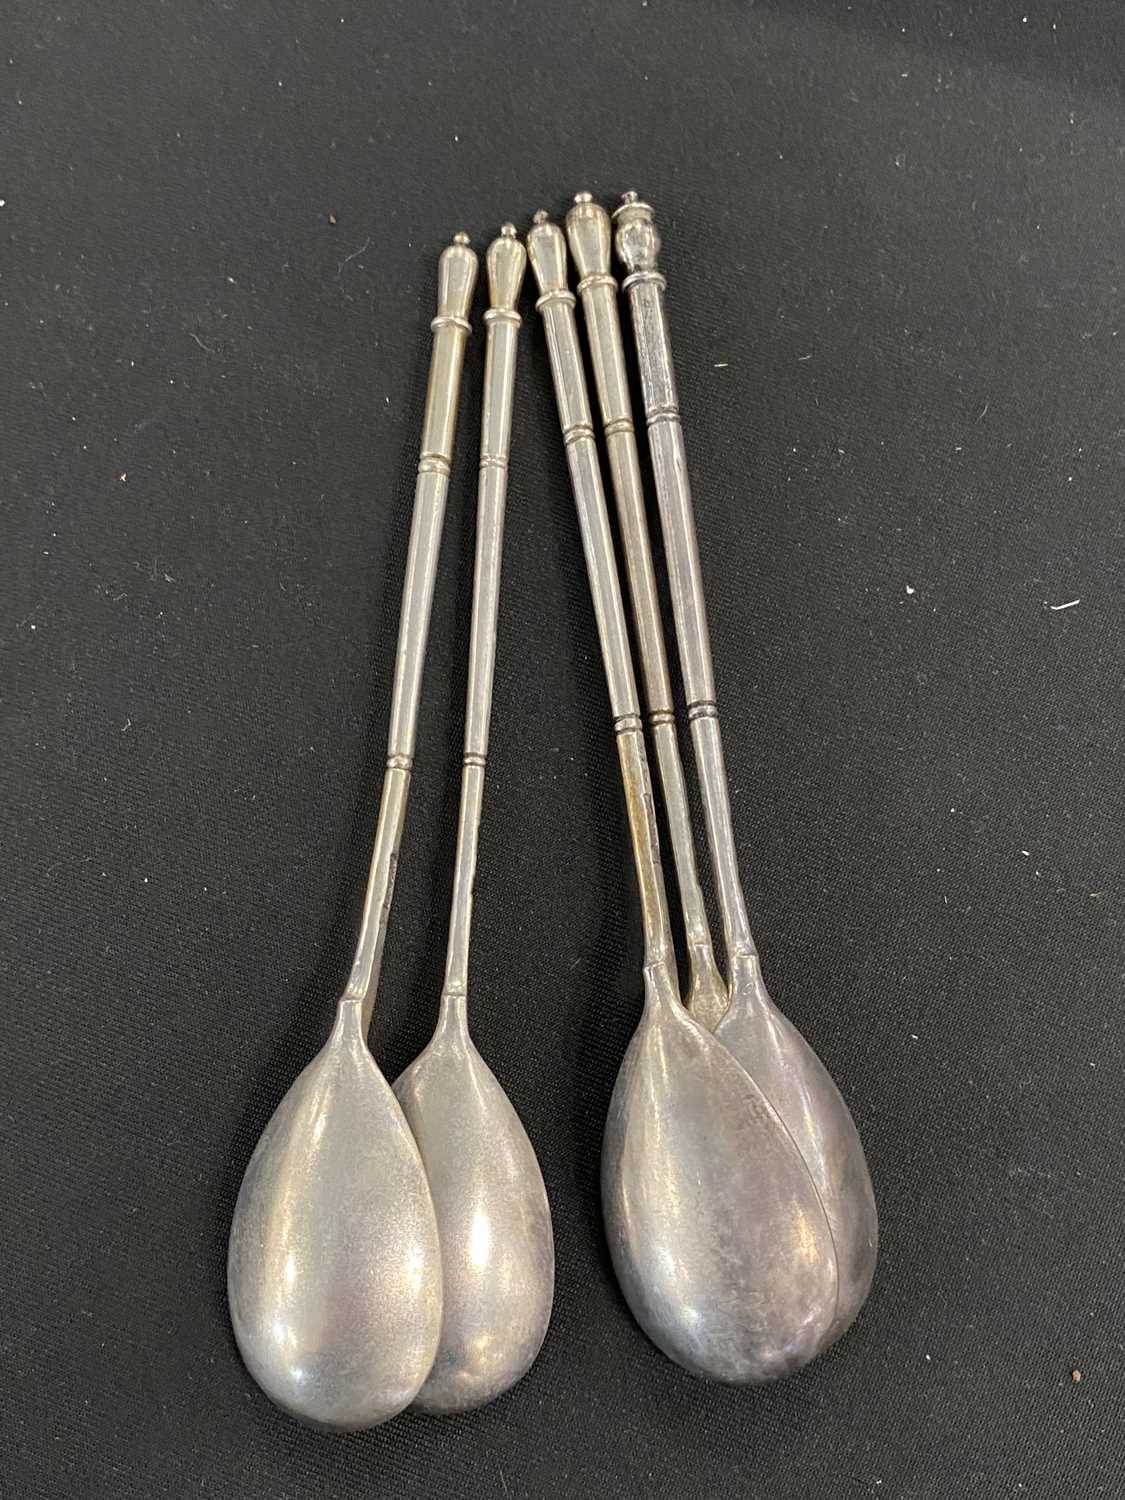 A collection of Russian silver teaspoons - Image 11 of 22